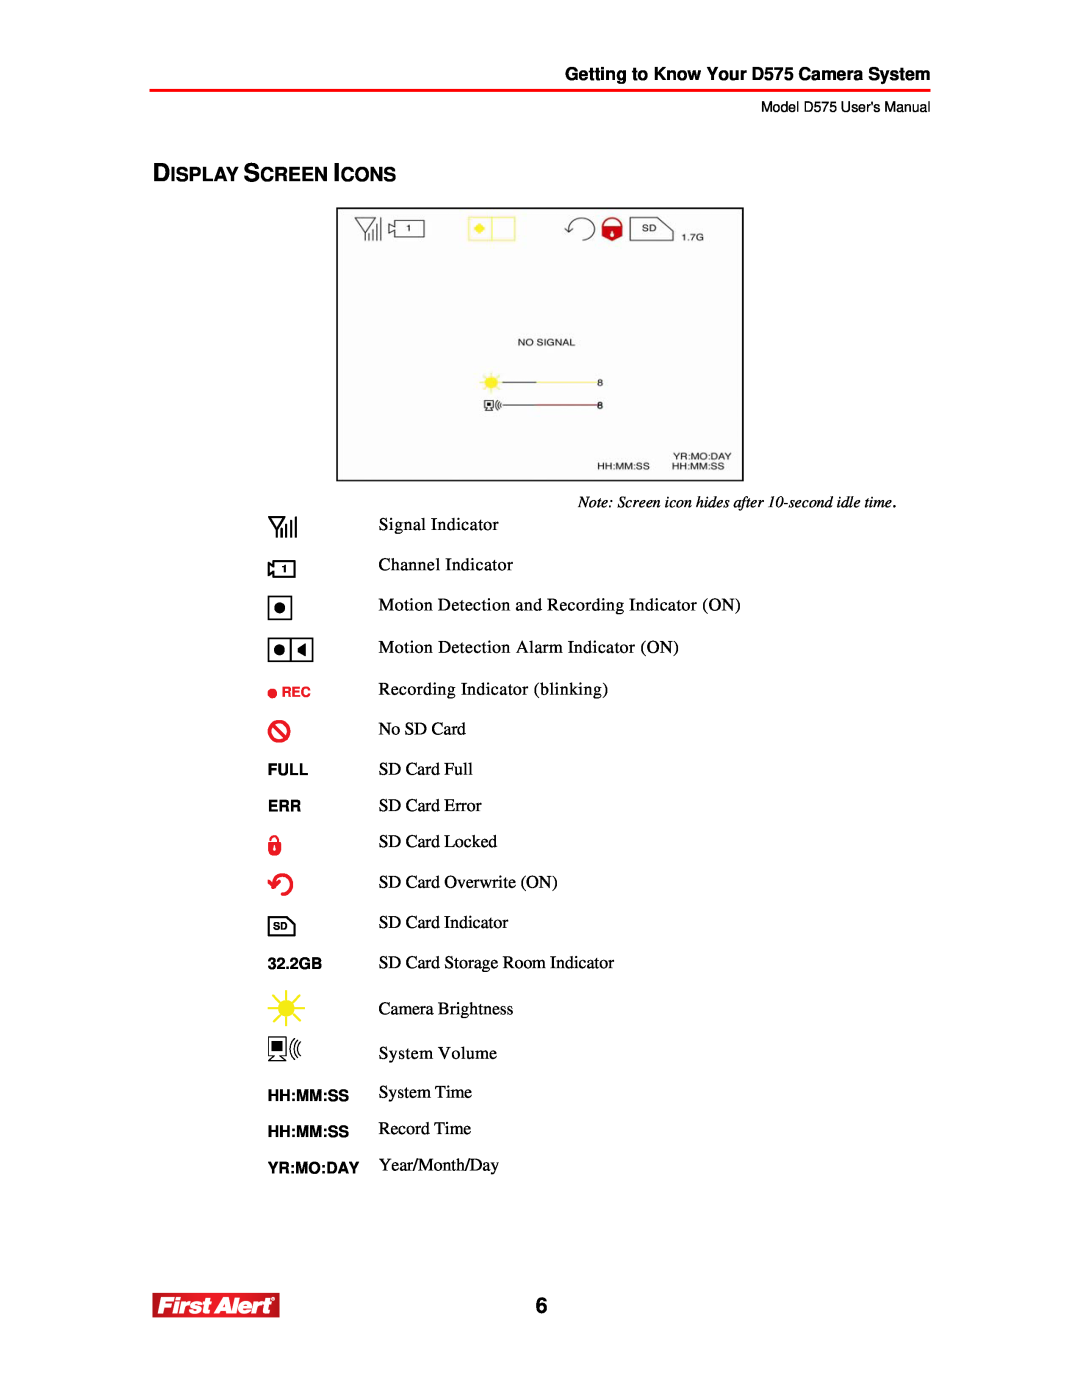 First Alert D575 user manual Display Screen Icons 